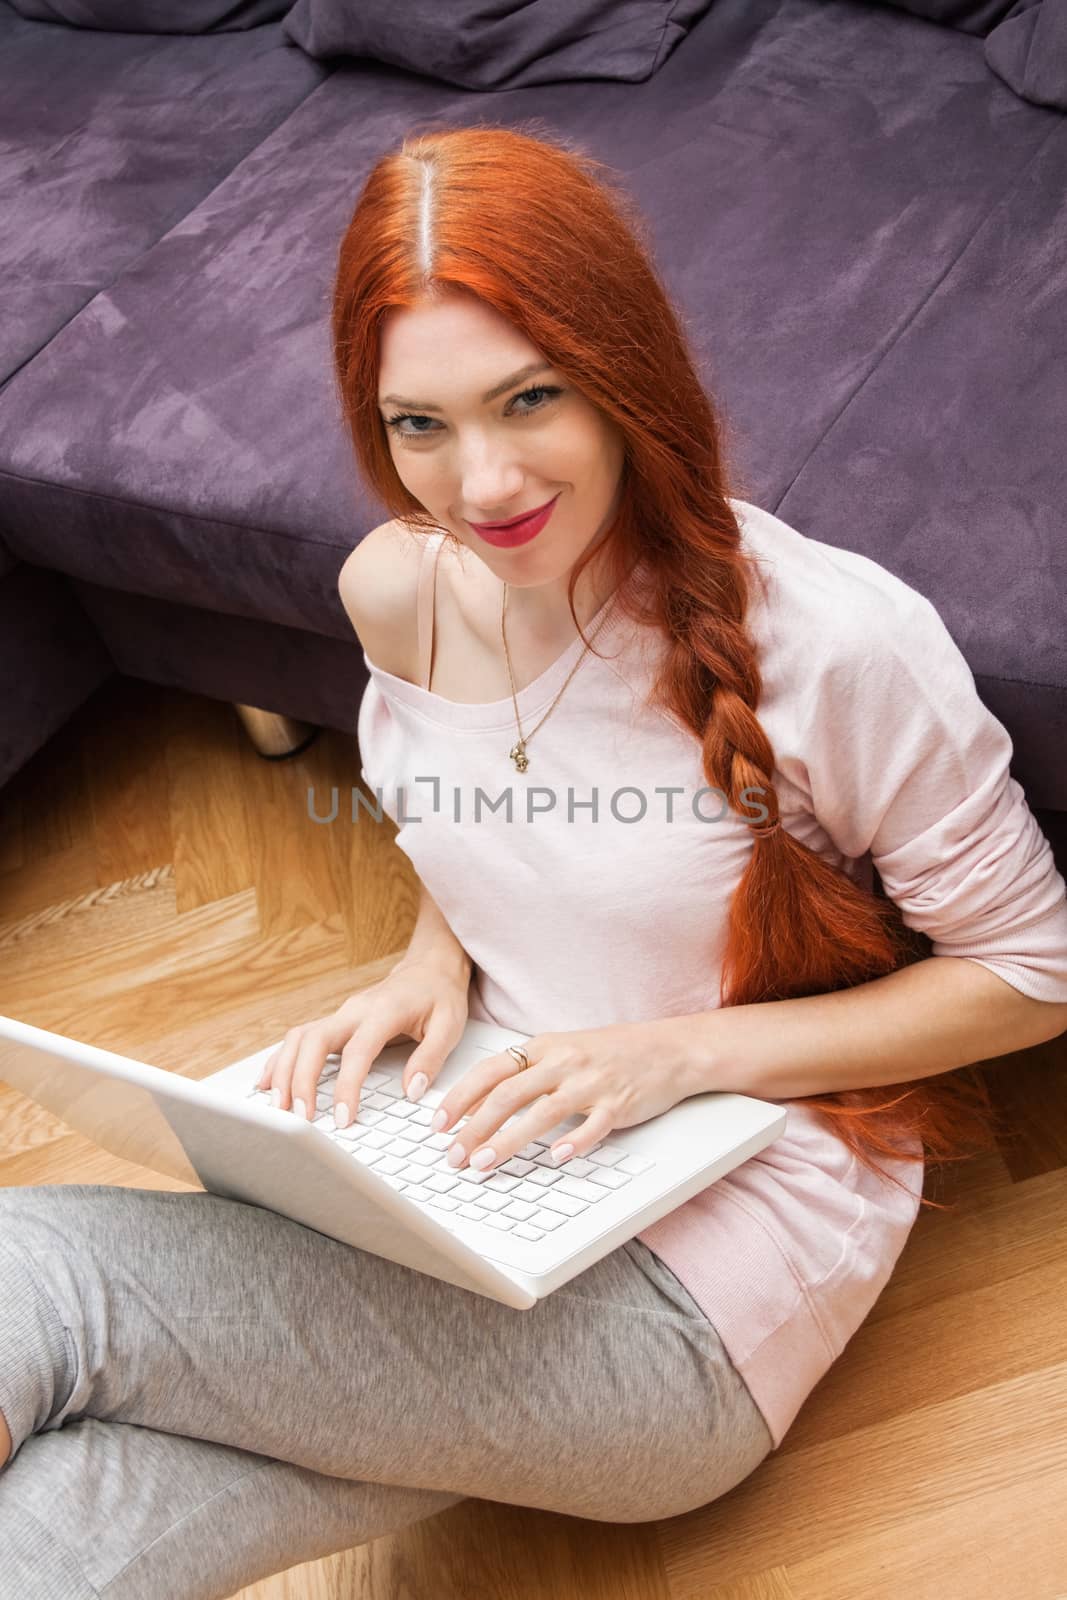 Pretty Young Woman Using her Laptop Computer In the Living Room with Feet on the Table and Showing Serious Face.